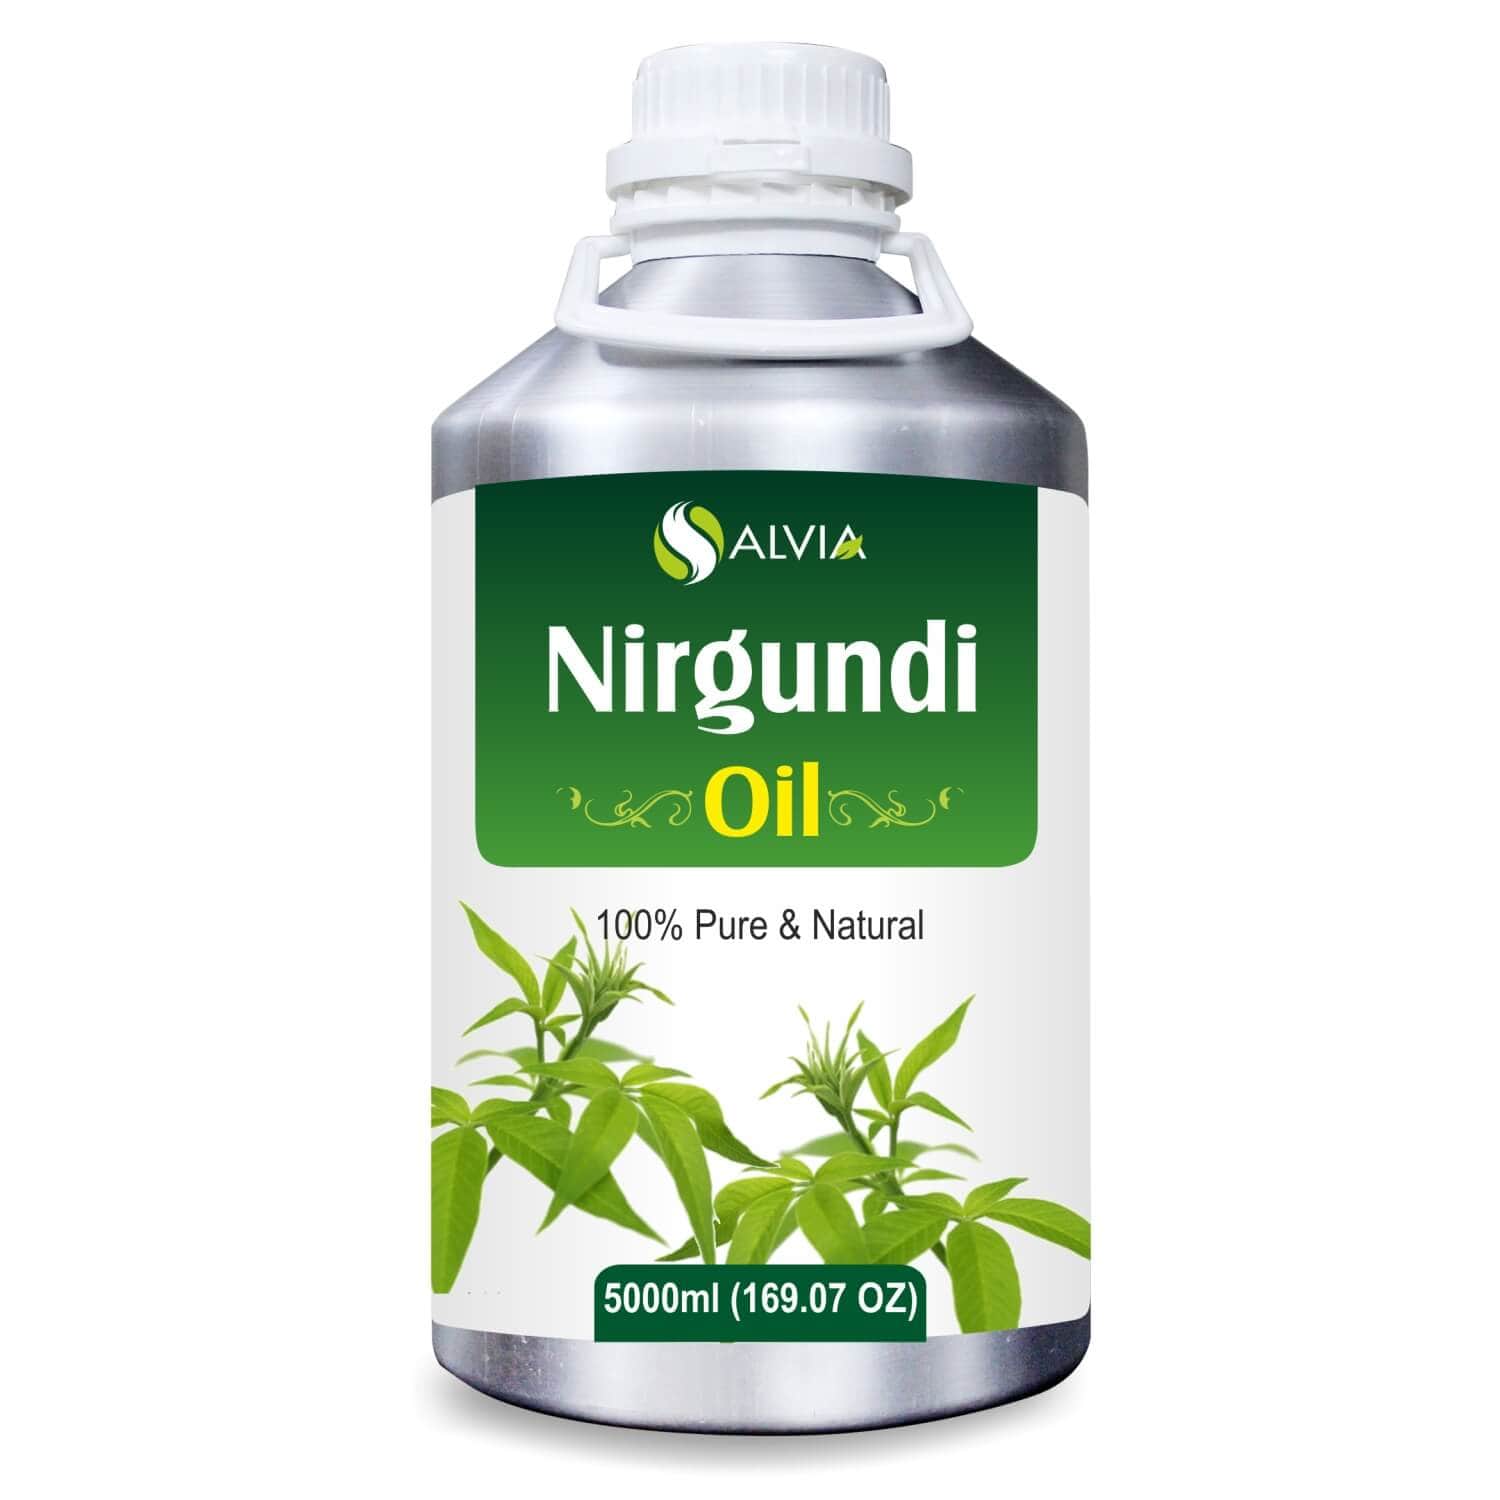 Salvia Natural Essential Oils 5000ml Nirgundi Oil Pure & Natural Essential Oil Undiluted Alleviates Joint & Muscular Pain, Deals With Respiratory Illness, Reduces Swelling, Prevents Grey Hair